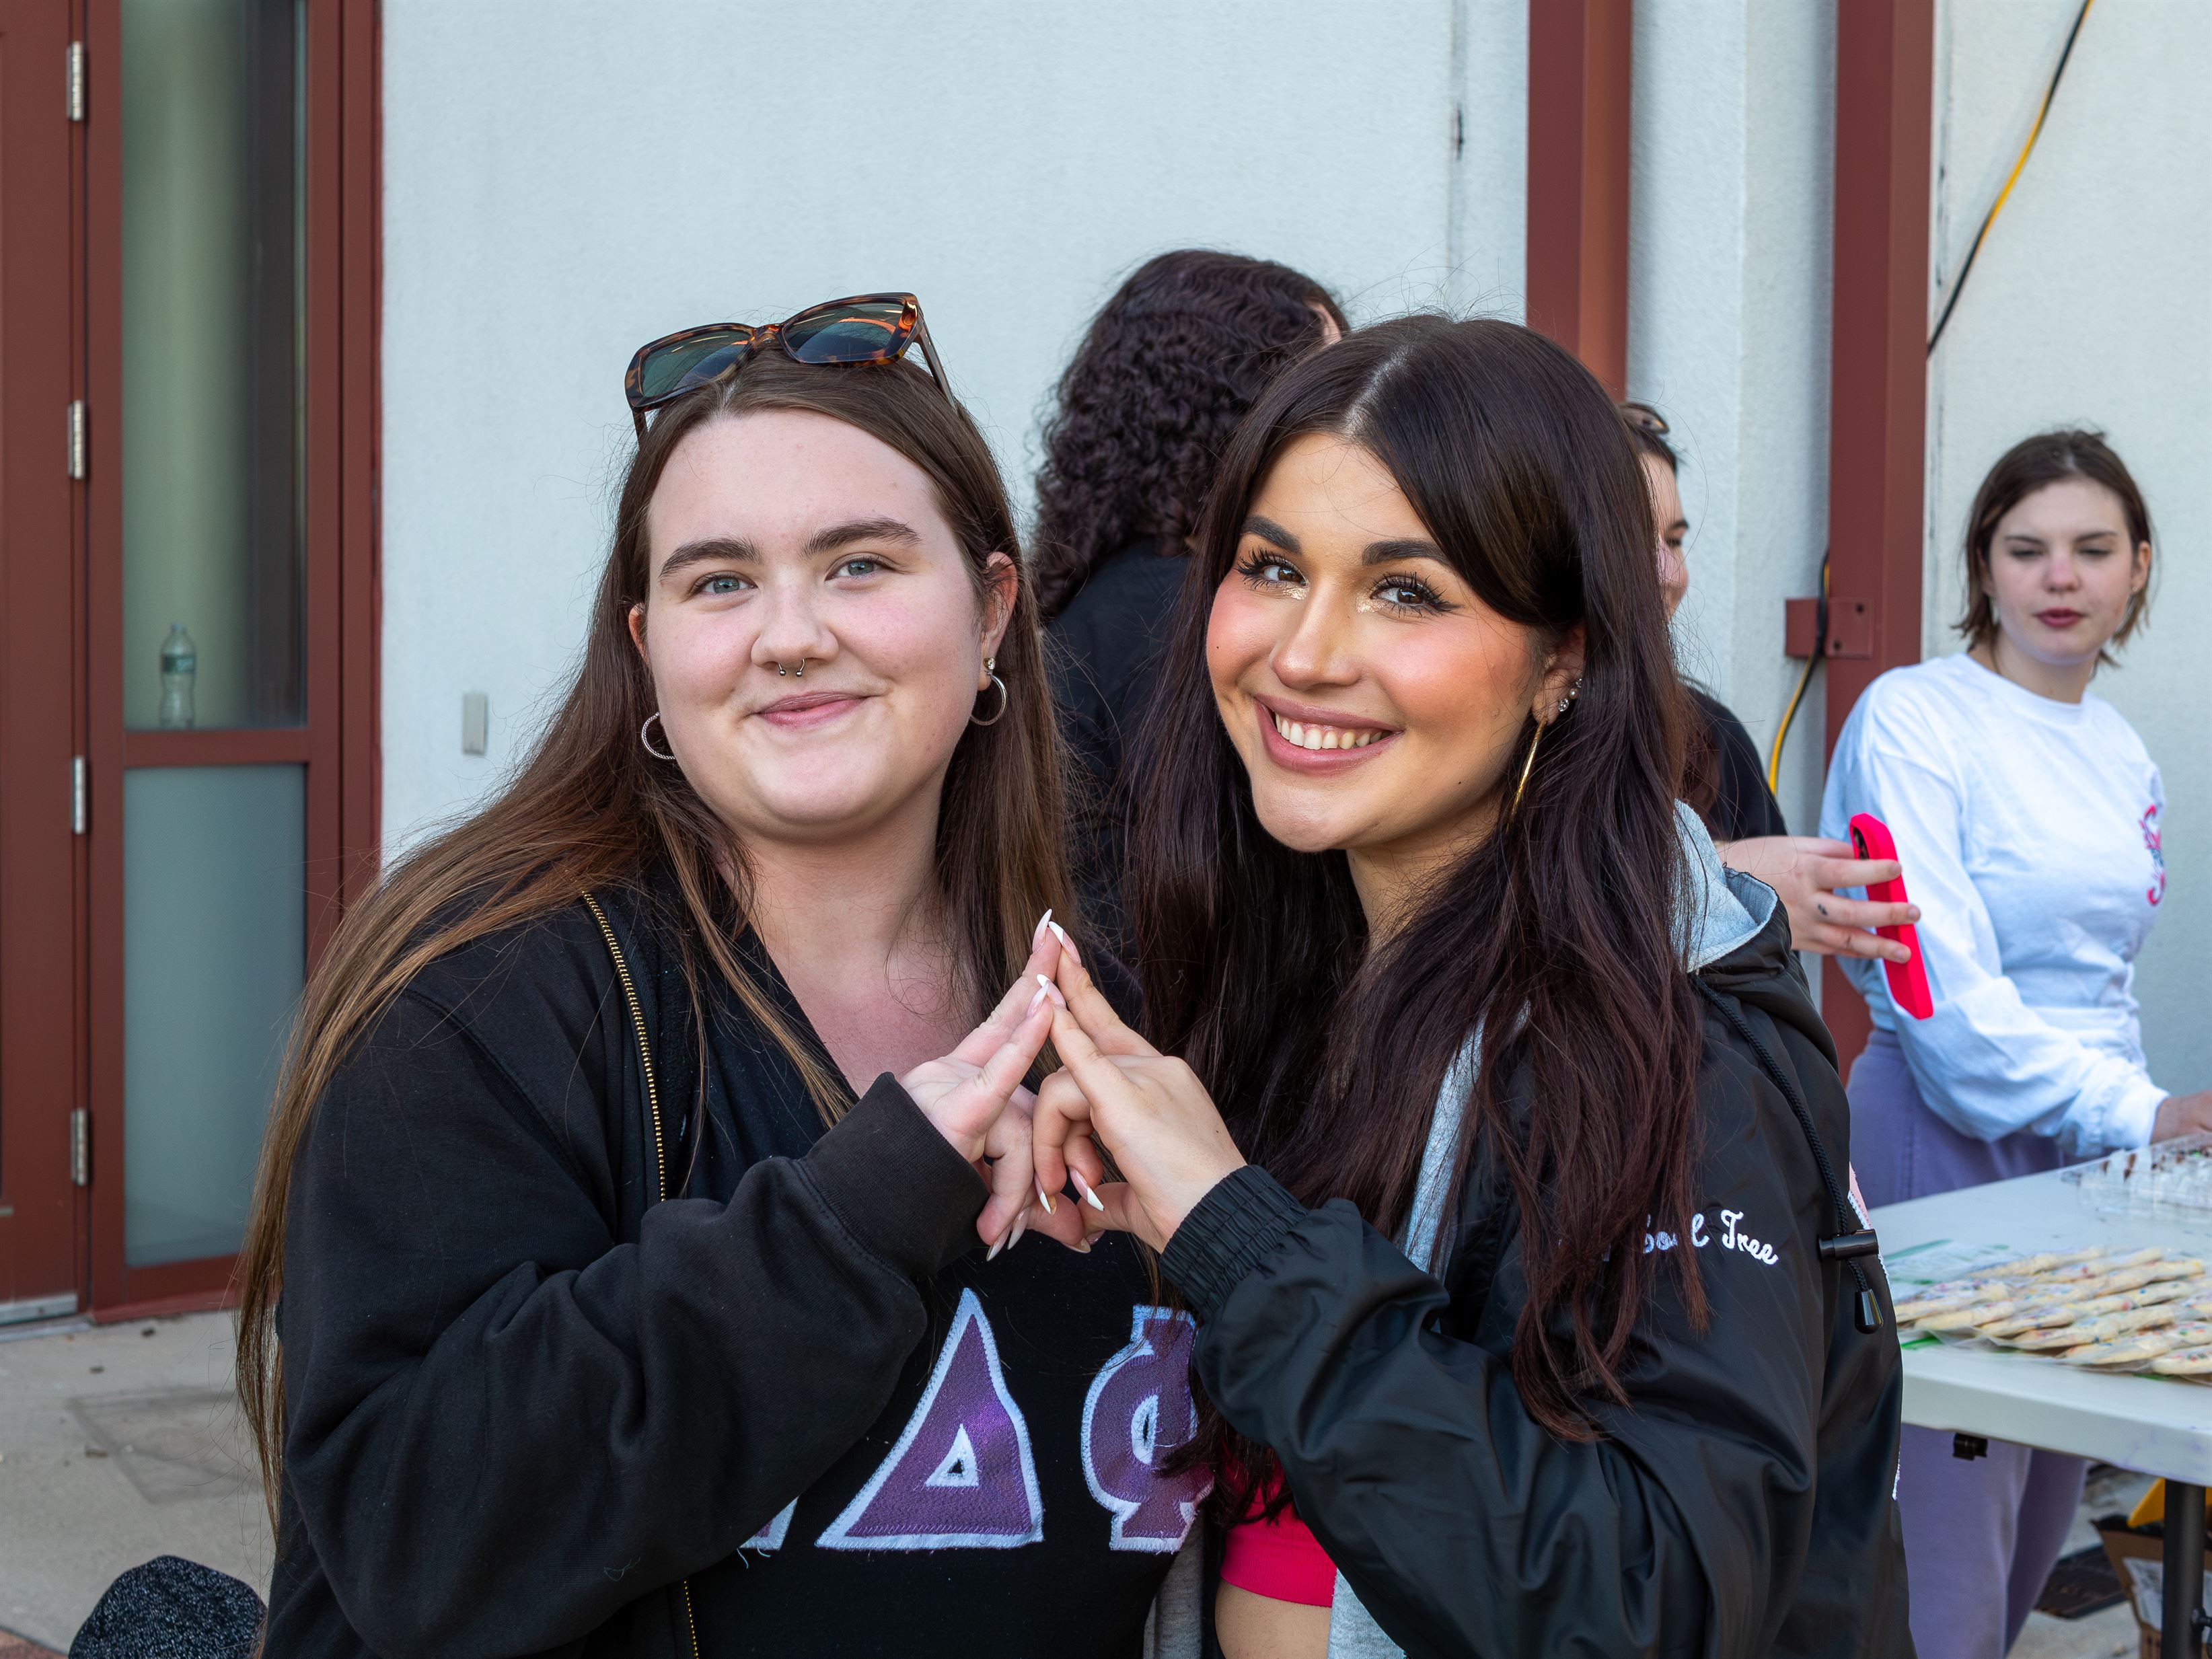 From left to right: Rose Vichiconti, Psychology and Linguistics major, Junior, and Lauren Yeswita, Business Administration major, Sophomore, attending the Cancer Awareness Walk event. Photo courtesy of Maral Tutunjian | The Montclarion